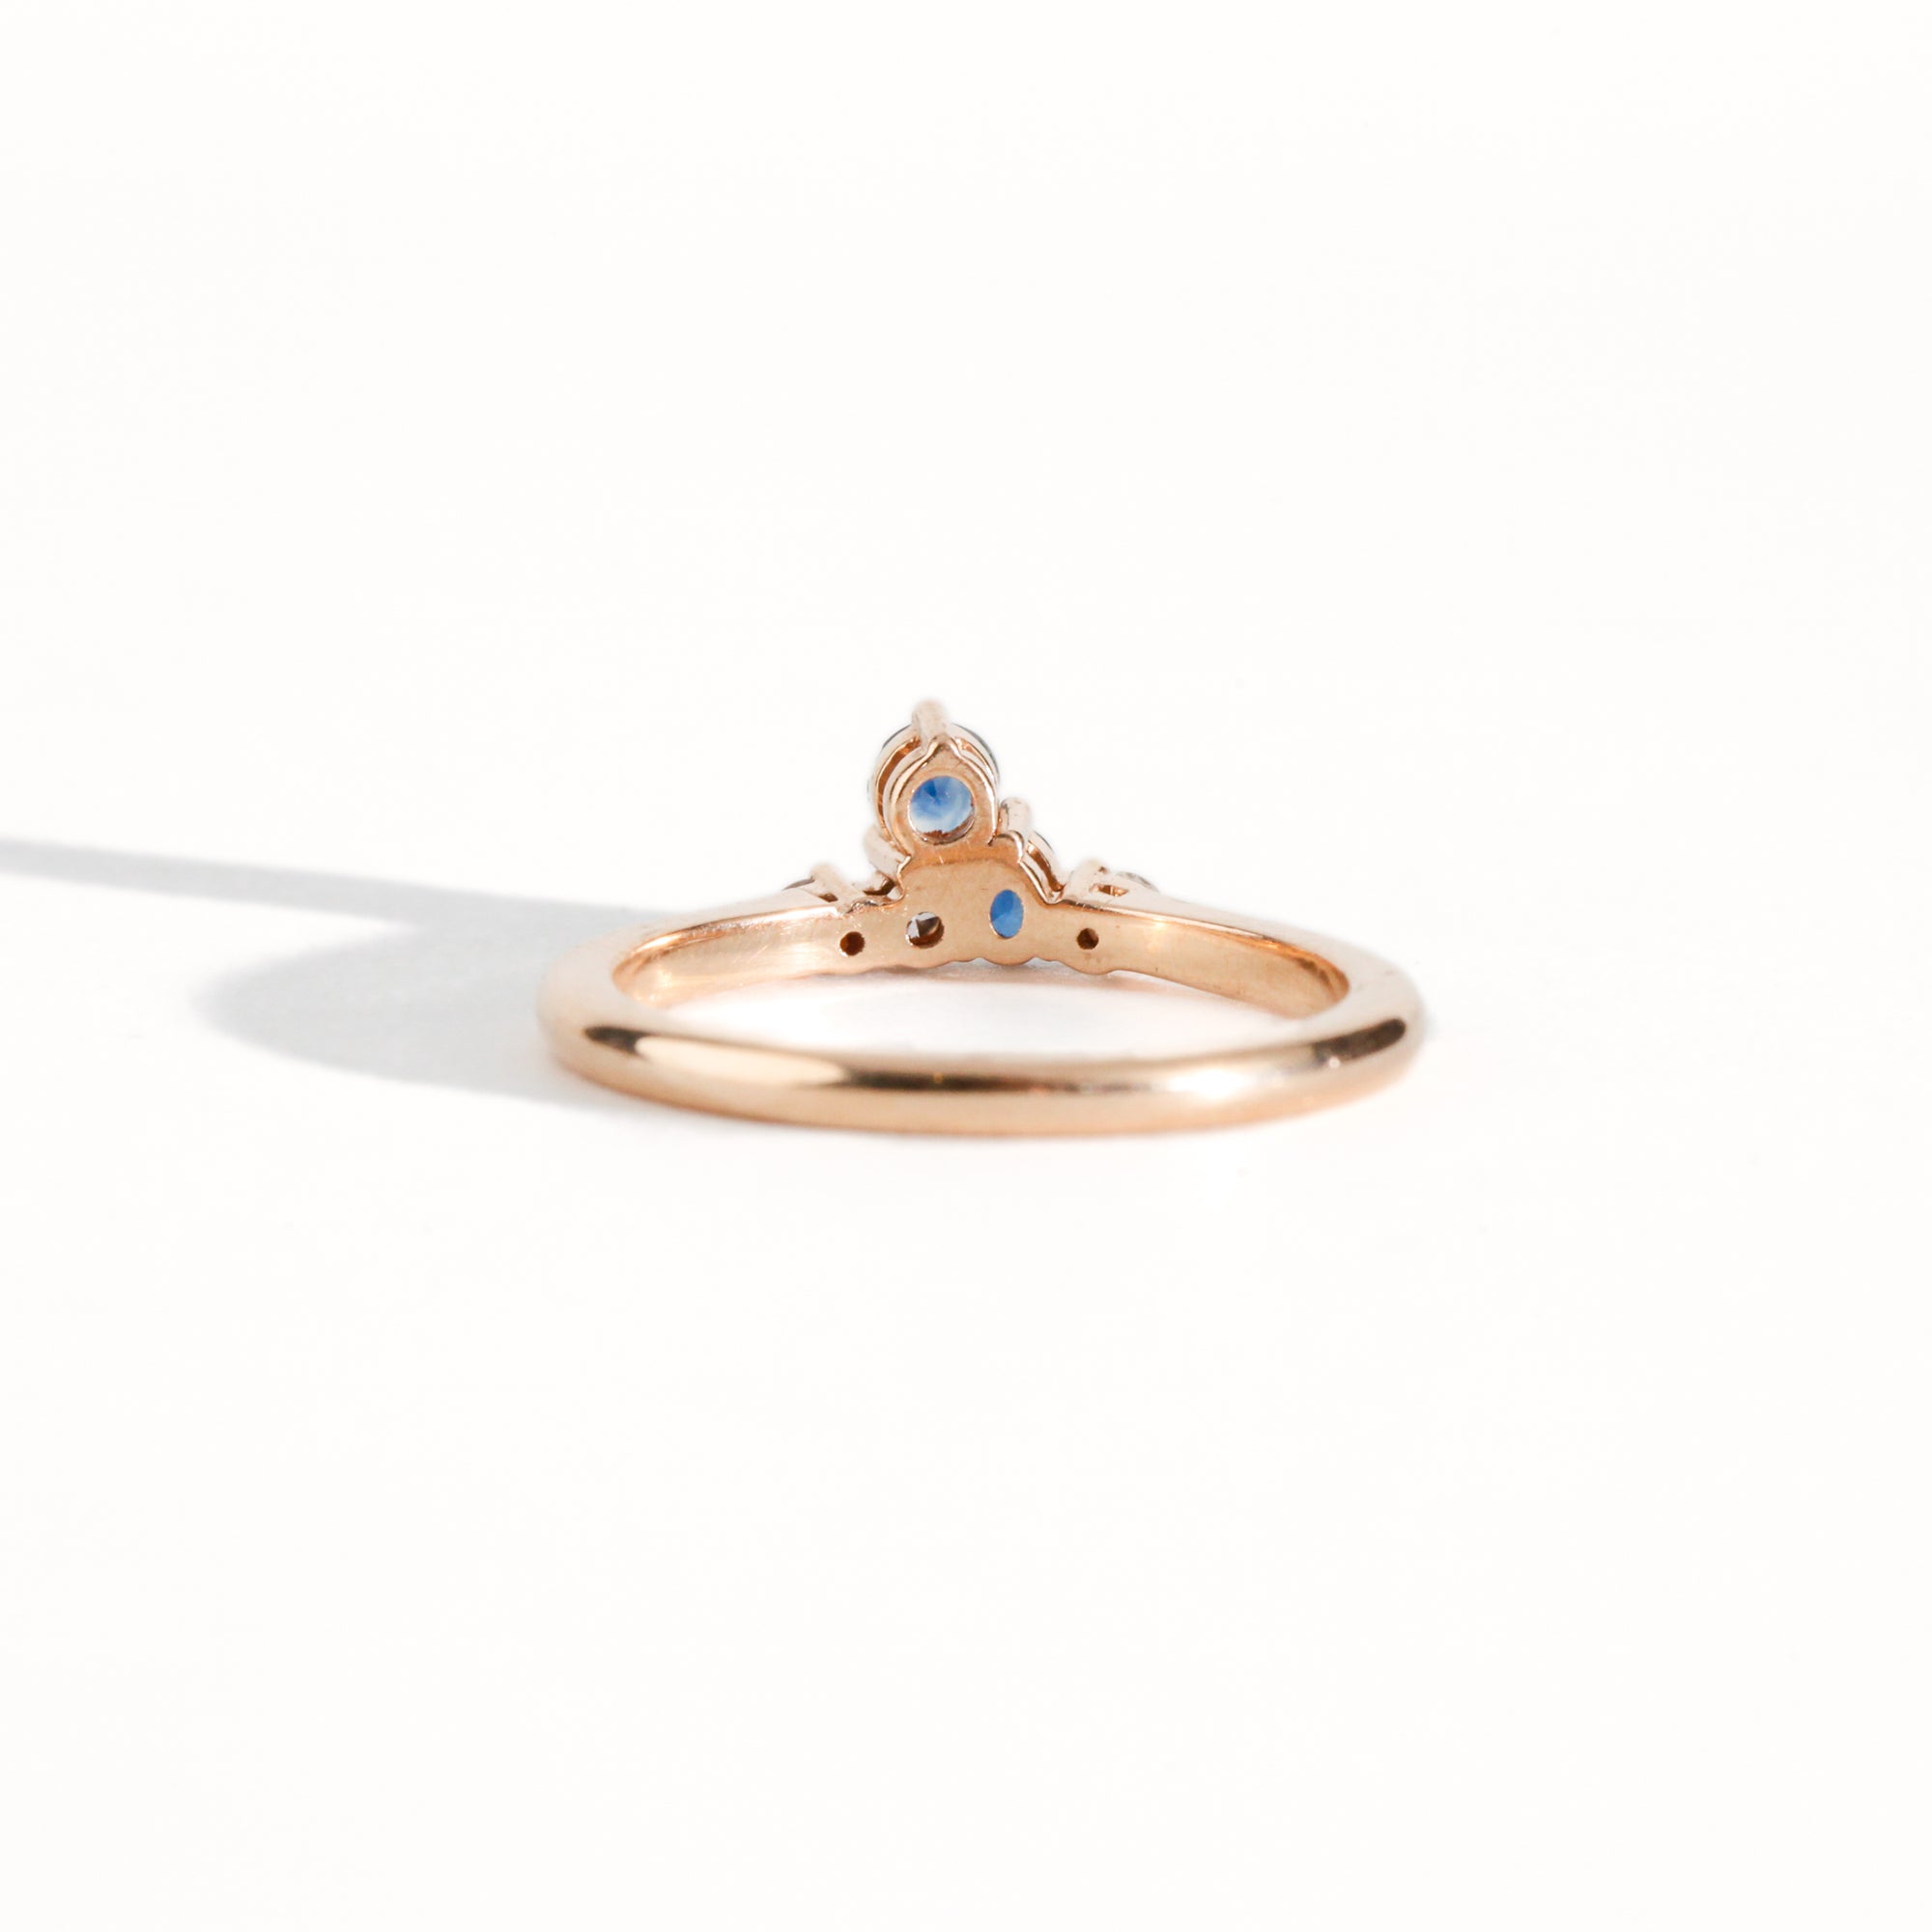 Ethically sourced blue Australian Sapphires and White and Champagne Diamond Ring with Recycled Refined 18ct Rose Gold. Bespoke and Handmade by Black Finch Jewellery in Melbourne